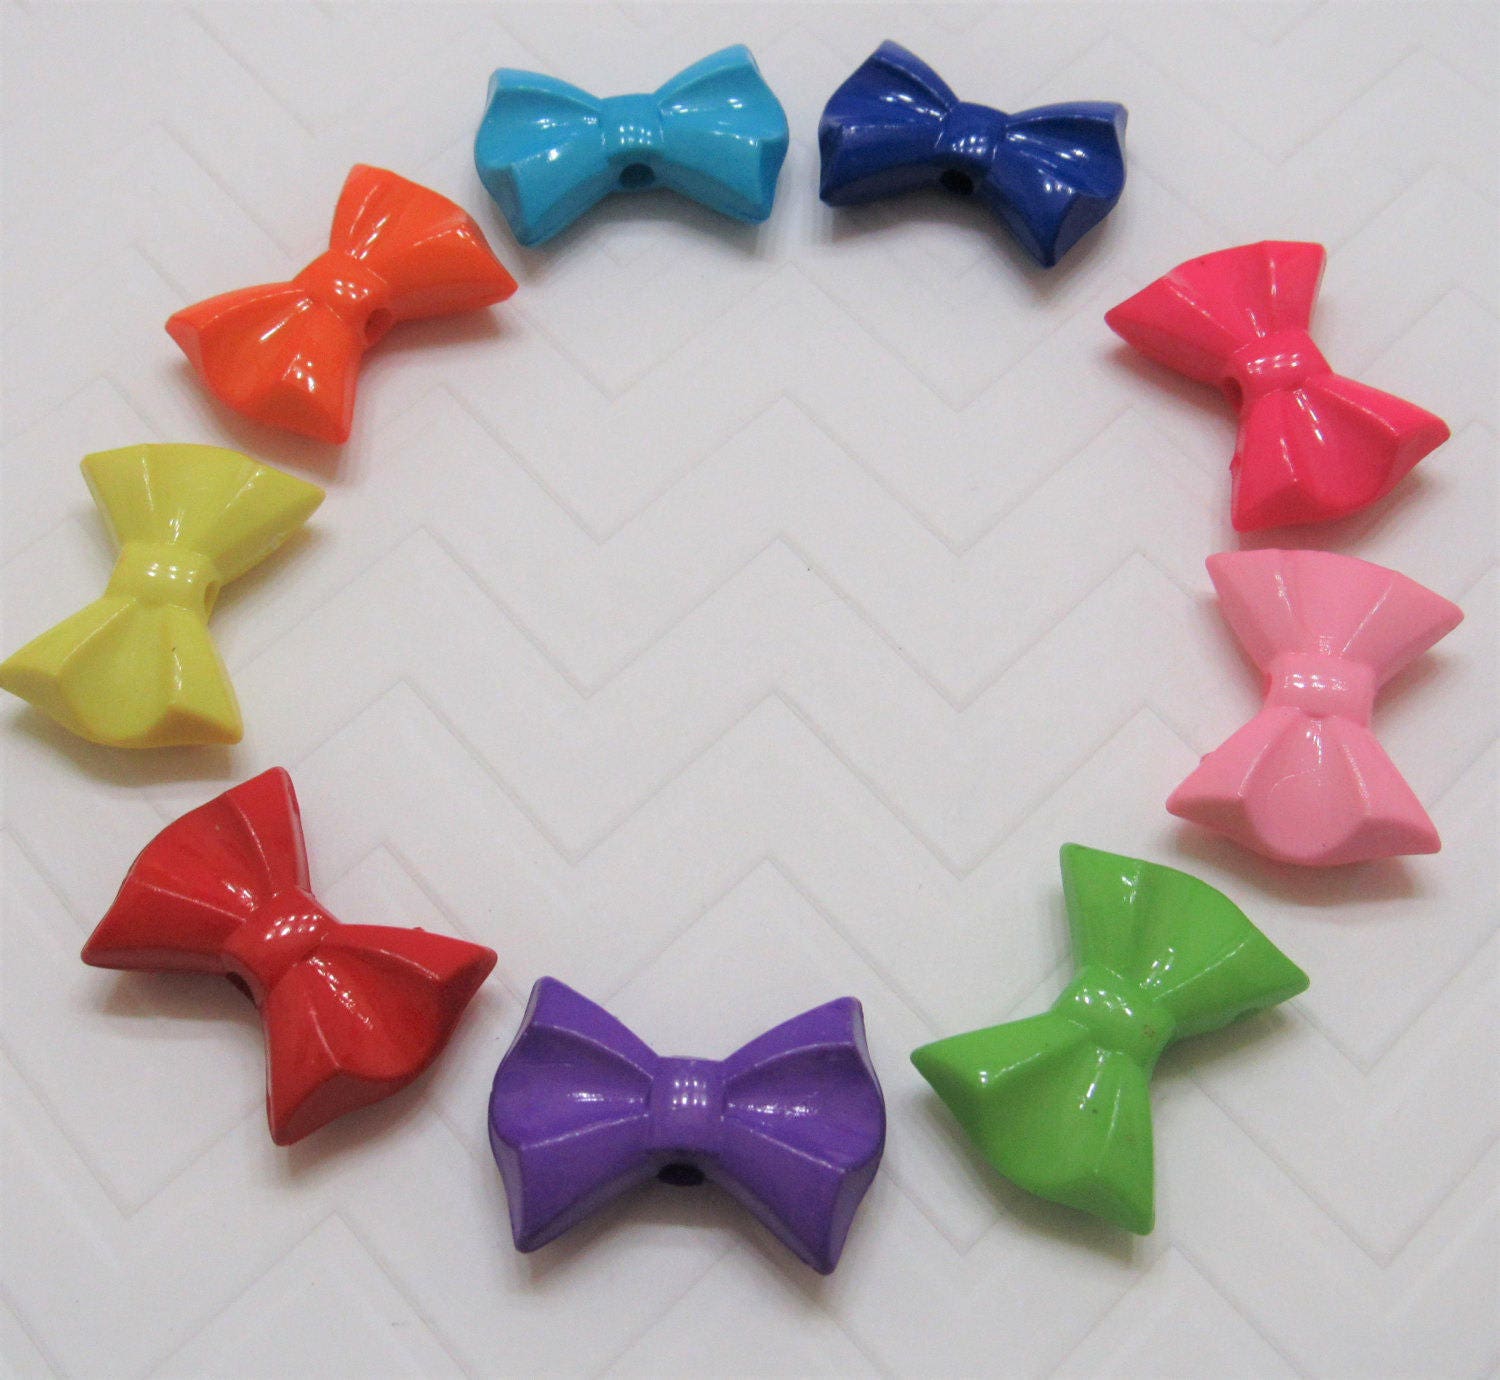 10 for .99 Chunky Bows, 26mm Bubblegum Bows Beads, Chunky Bow Bead, Bu –  Beadstobows